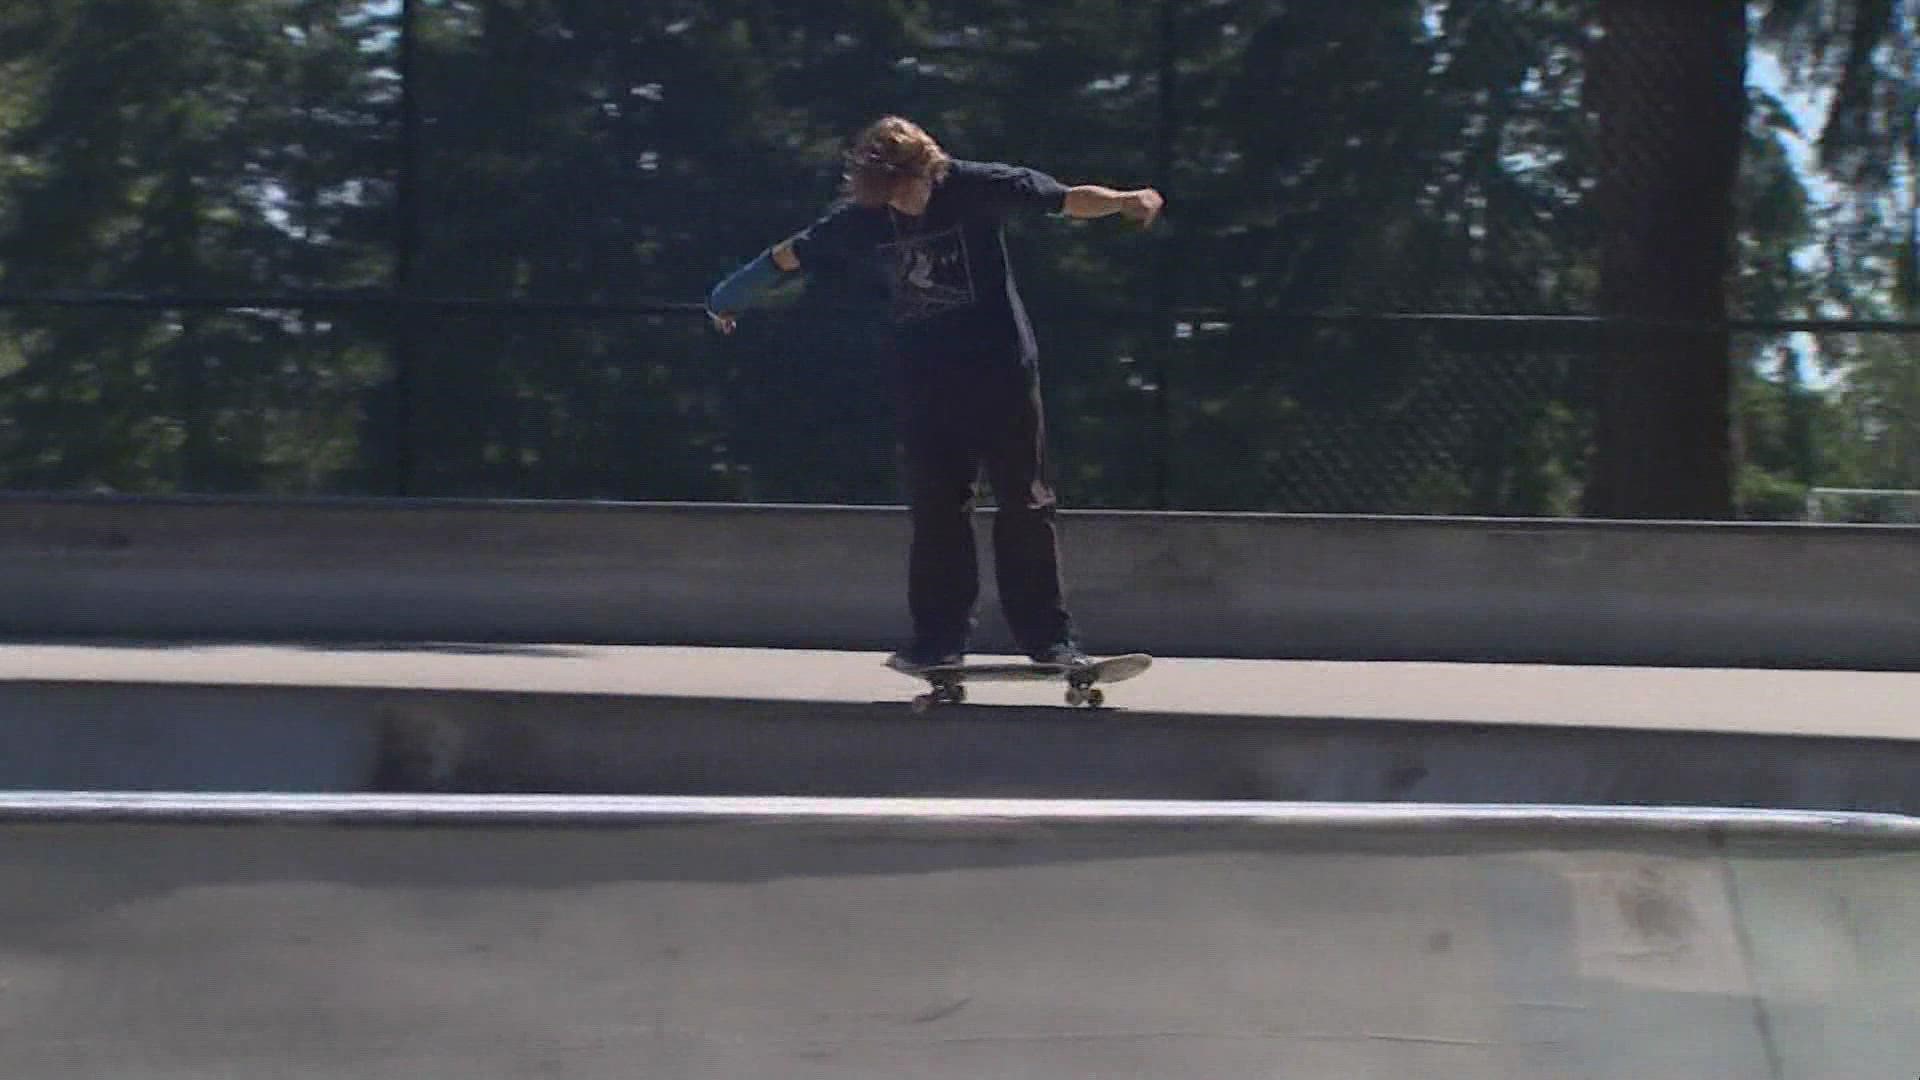 Skateboarders say the proposed site for a new city facility in Federal Way is threatening a space that they love.